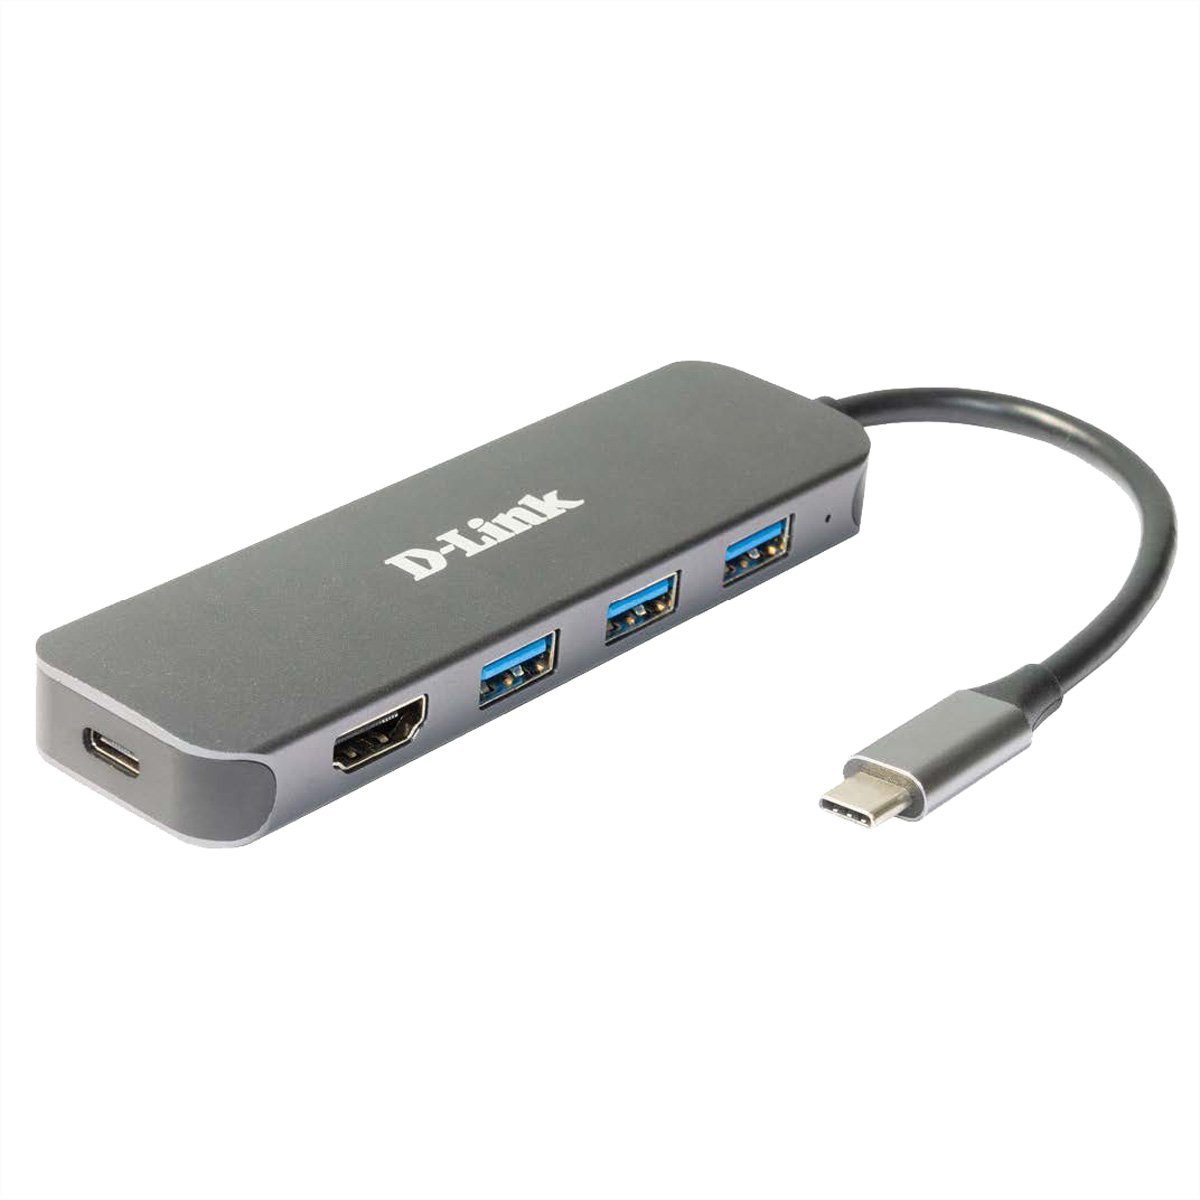 Computer-Adapter DUB-2333 HDMI/Power 5-in-1 Delivery mit D-Link Hub USB-C